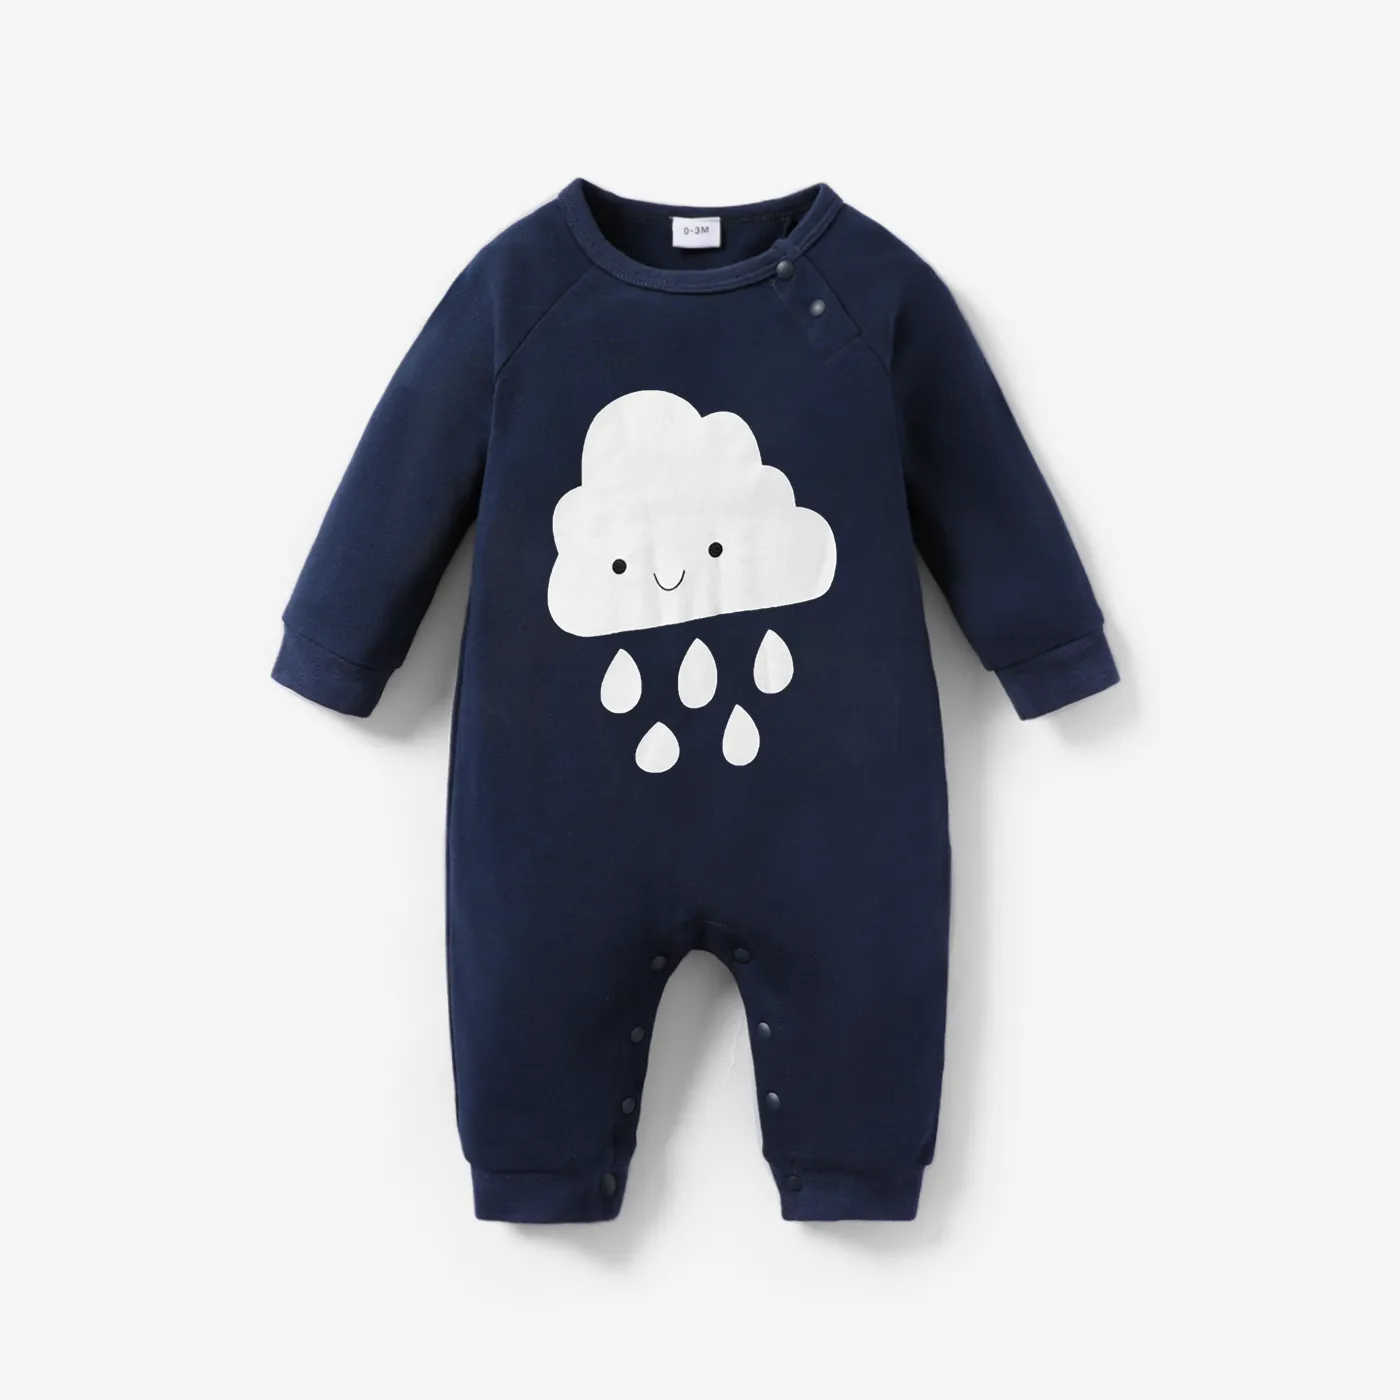 100% Cotton Moon or Cloud Print Long-sleeve Baby Jumpsuit